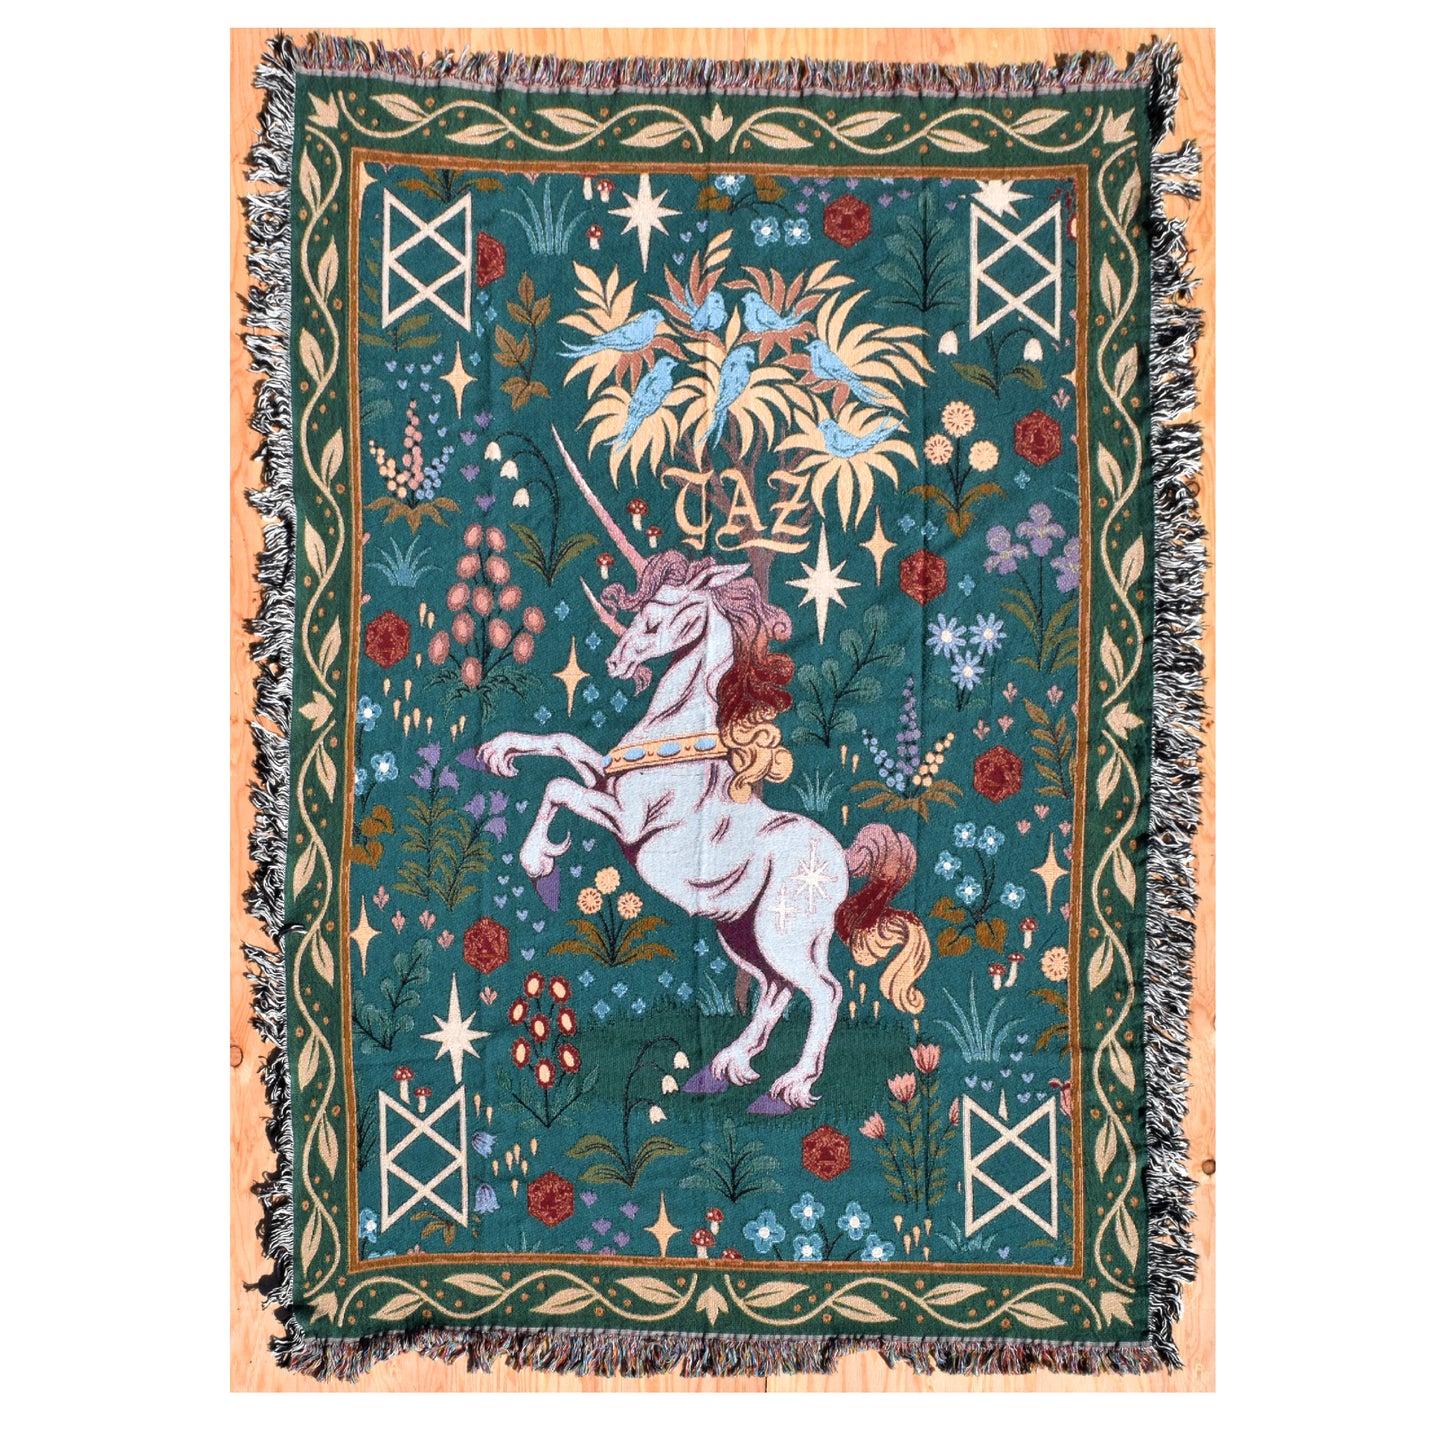 Photo of a teal and green tapestry blanket with Garyl in the center. He’s rearing back on his hind legs and has a flowing mane and tail. There are flowers around him. Above him is a tree with blue birds. There is a B.o.B. rune in each corner.